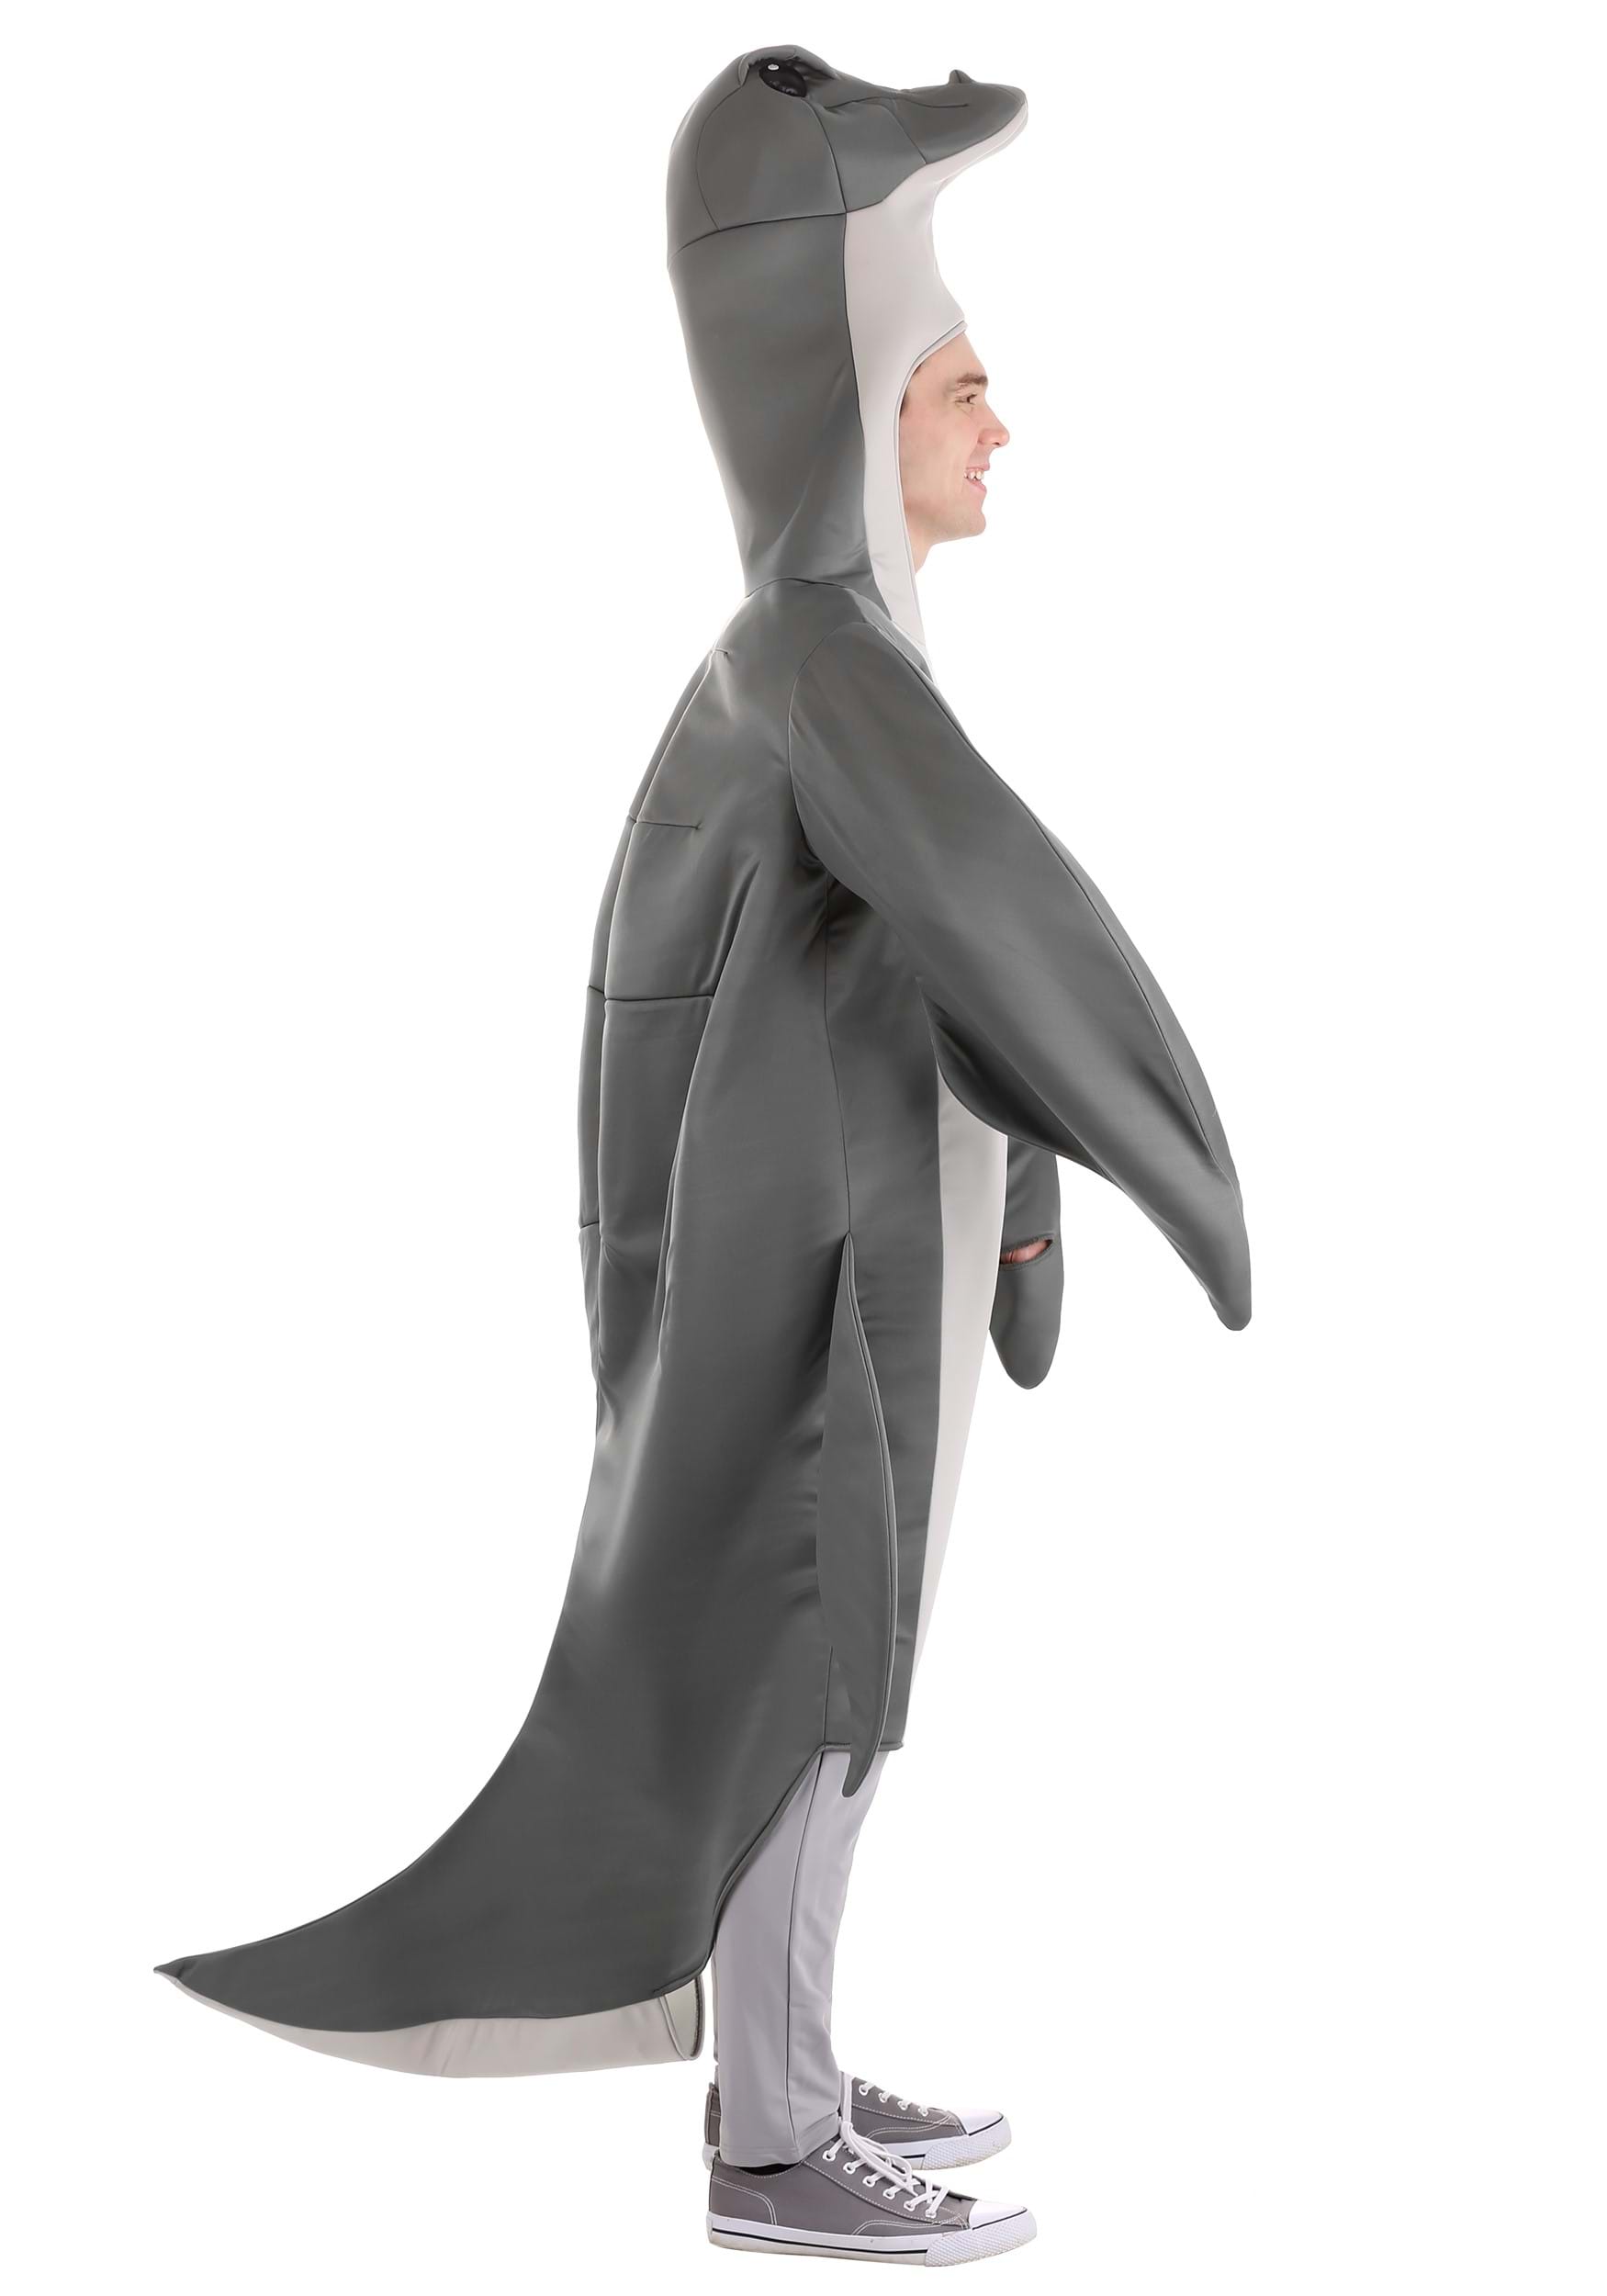 Loch Ness Monster Costume For Adults